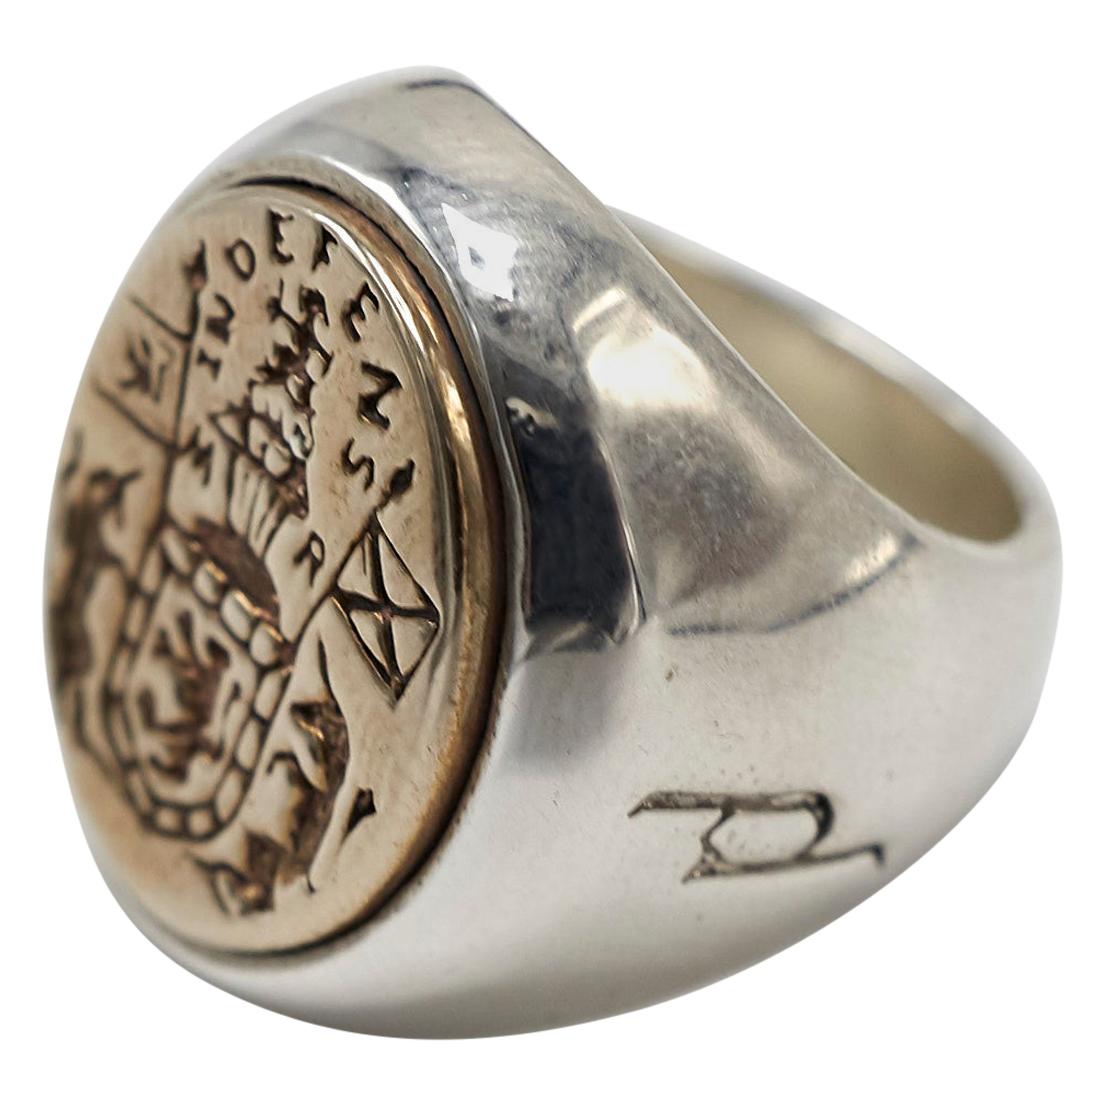 Crest Signet Ring Sterling Silver 14k Gold Queen Mary Family Crest Lion Unicorn J Dauphin
Unisex, Our metals are reclaimed or fair mined.

Inspired by Queen Mary of Scots ring. Gold signet-ring; engraved; shoulders ornamented with flowers and